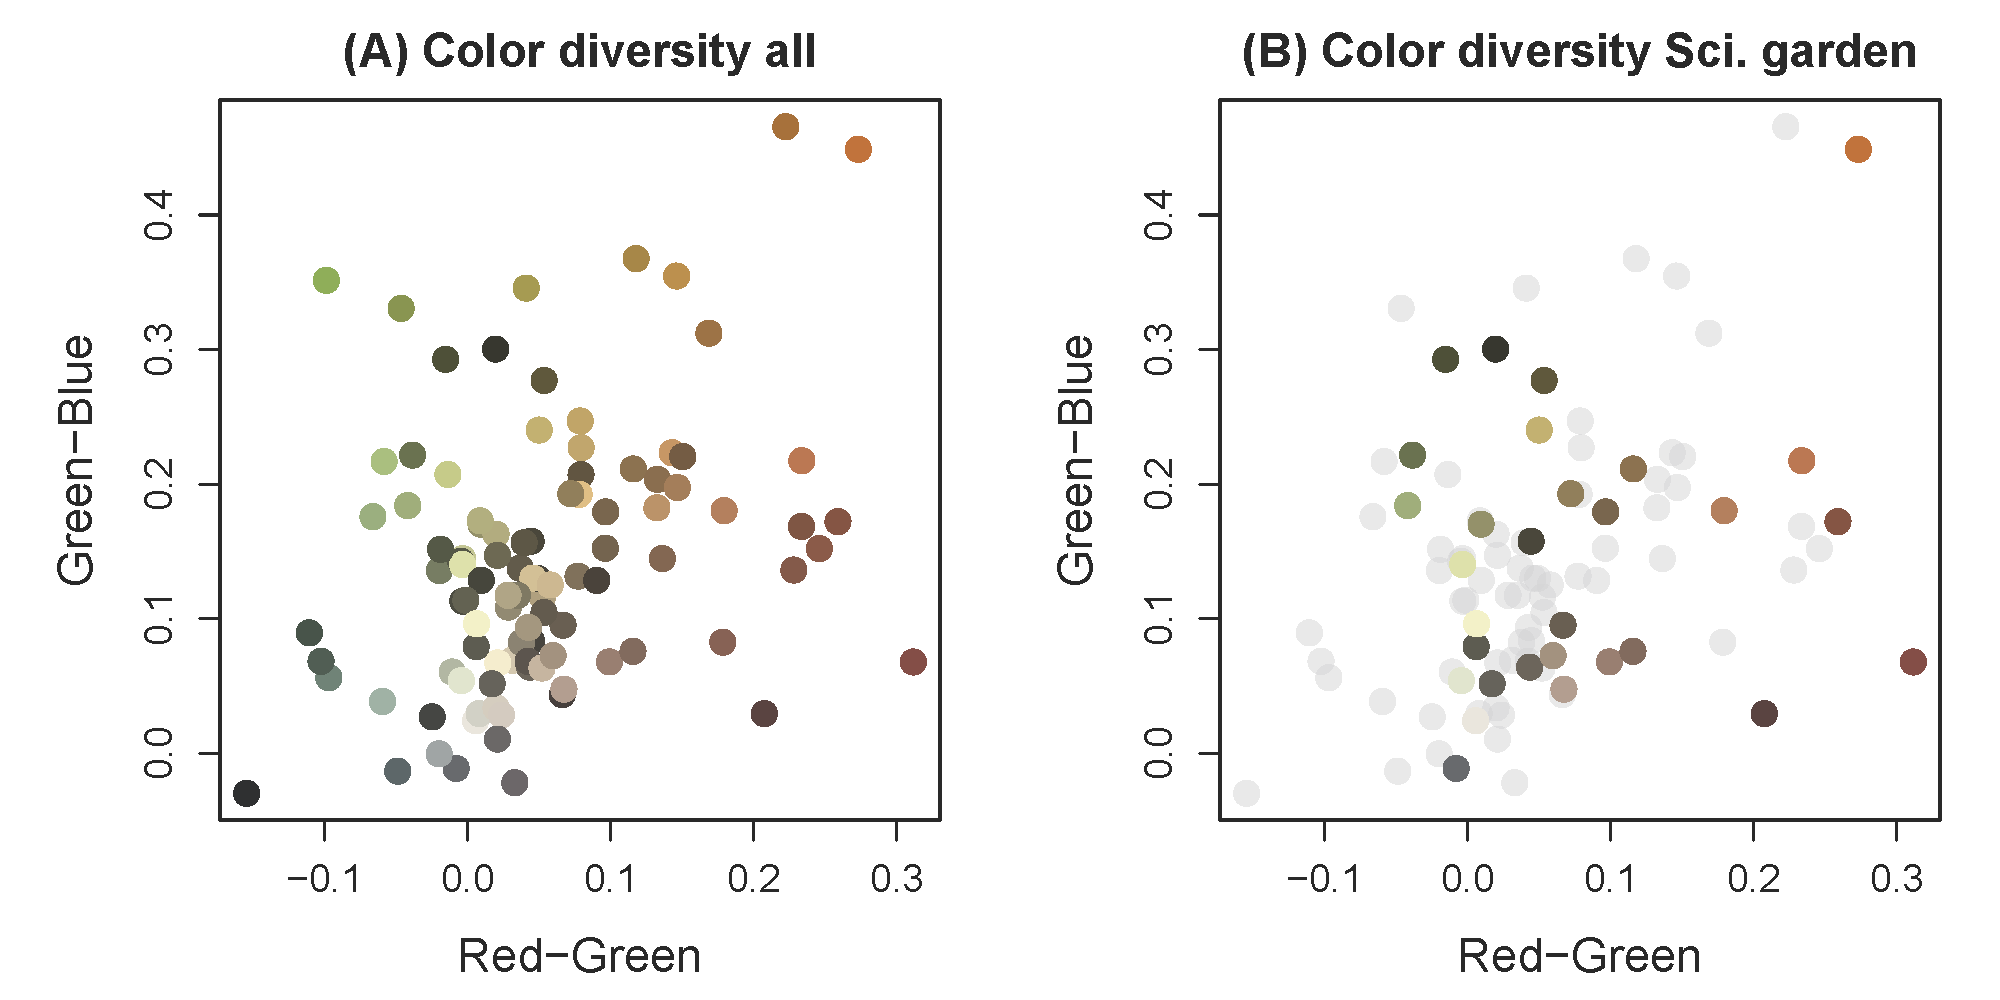 Color diversity of bugs on alfalfa. Points represent animals (mostly arthropods) photographed on alfalfa. The color of the point denotes the average color of the organism, with the points organized according to the relative intensities of red vs green and green vs blue. Each photographed taxon is represented by a single picture and point. Panel A shows all unique taxa, where the colored points in panel B show only those organisms found in the Science Garden (the other images are shown in light gray for reference).